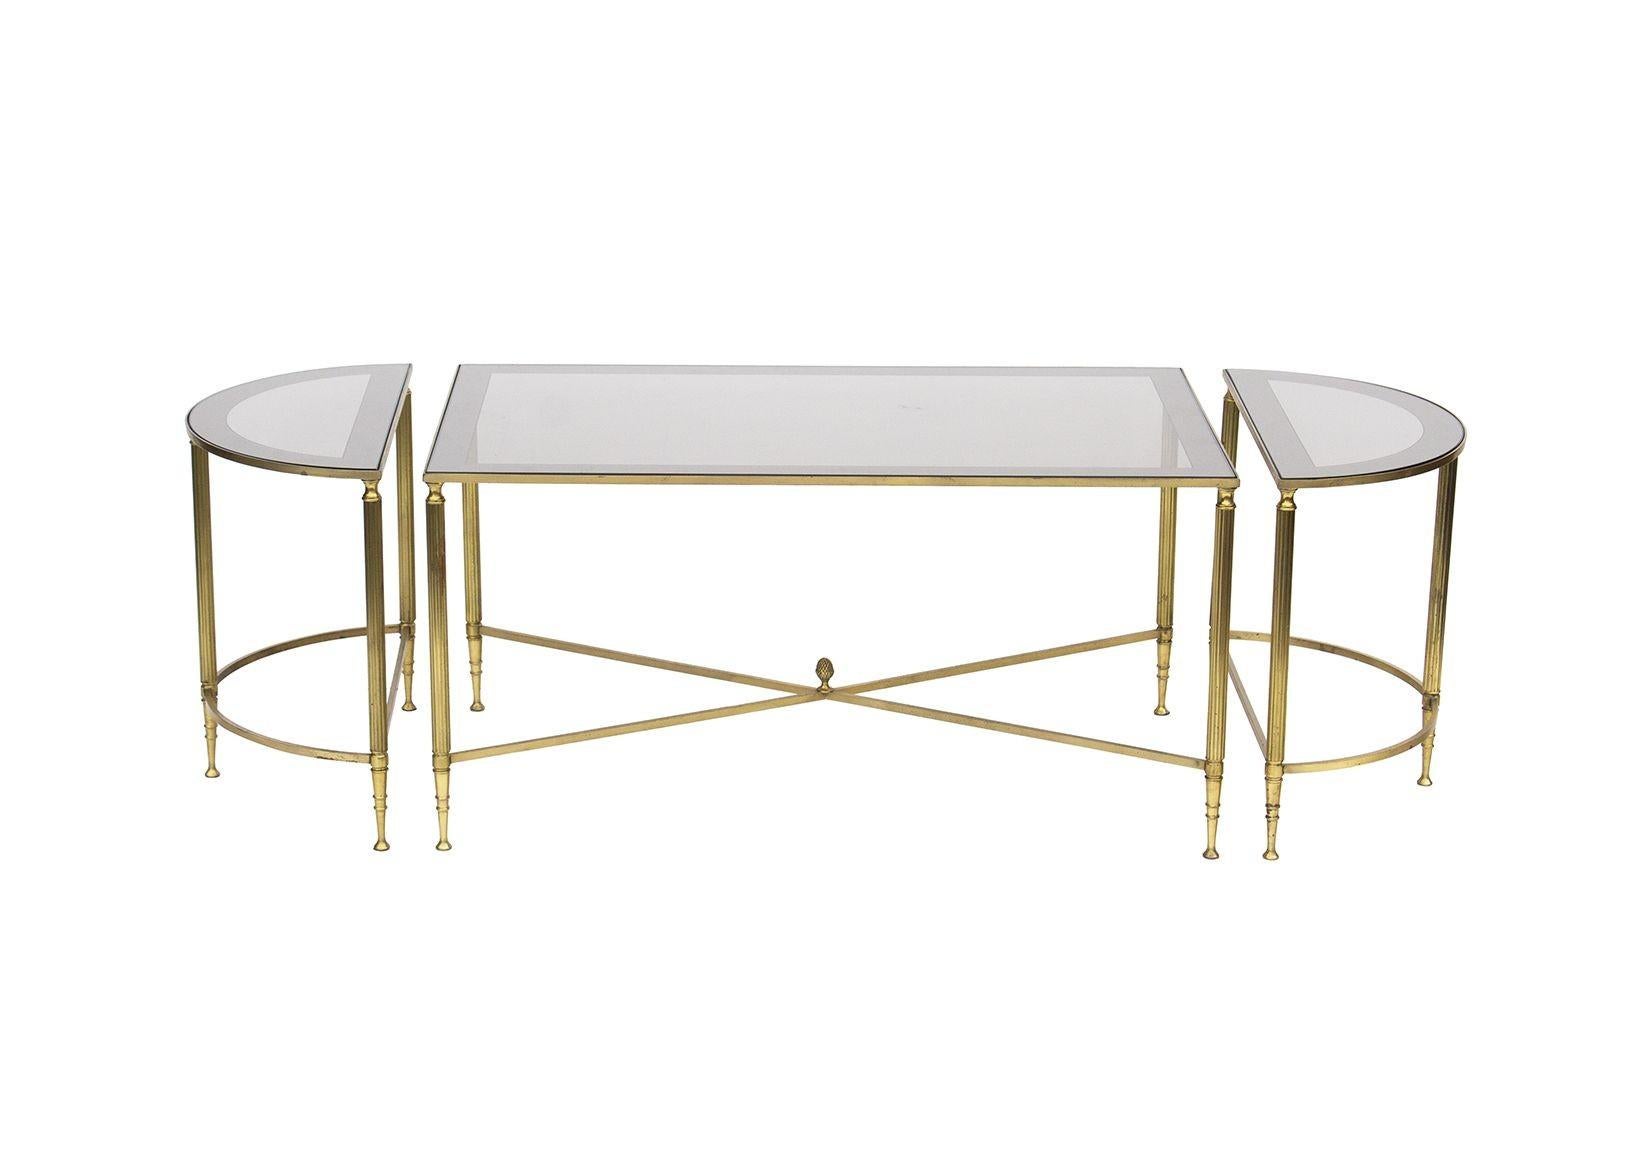 Italy, 1960s
 
Neoclassical 3 piece bunching cocktail table in brass after Maison Jansen. Elegant fluted legs. This set of three can be used together or separated as desired. The tops are original glass and reverse painted with a border around their